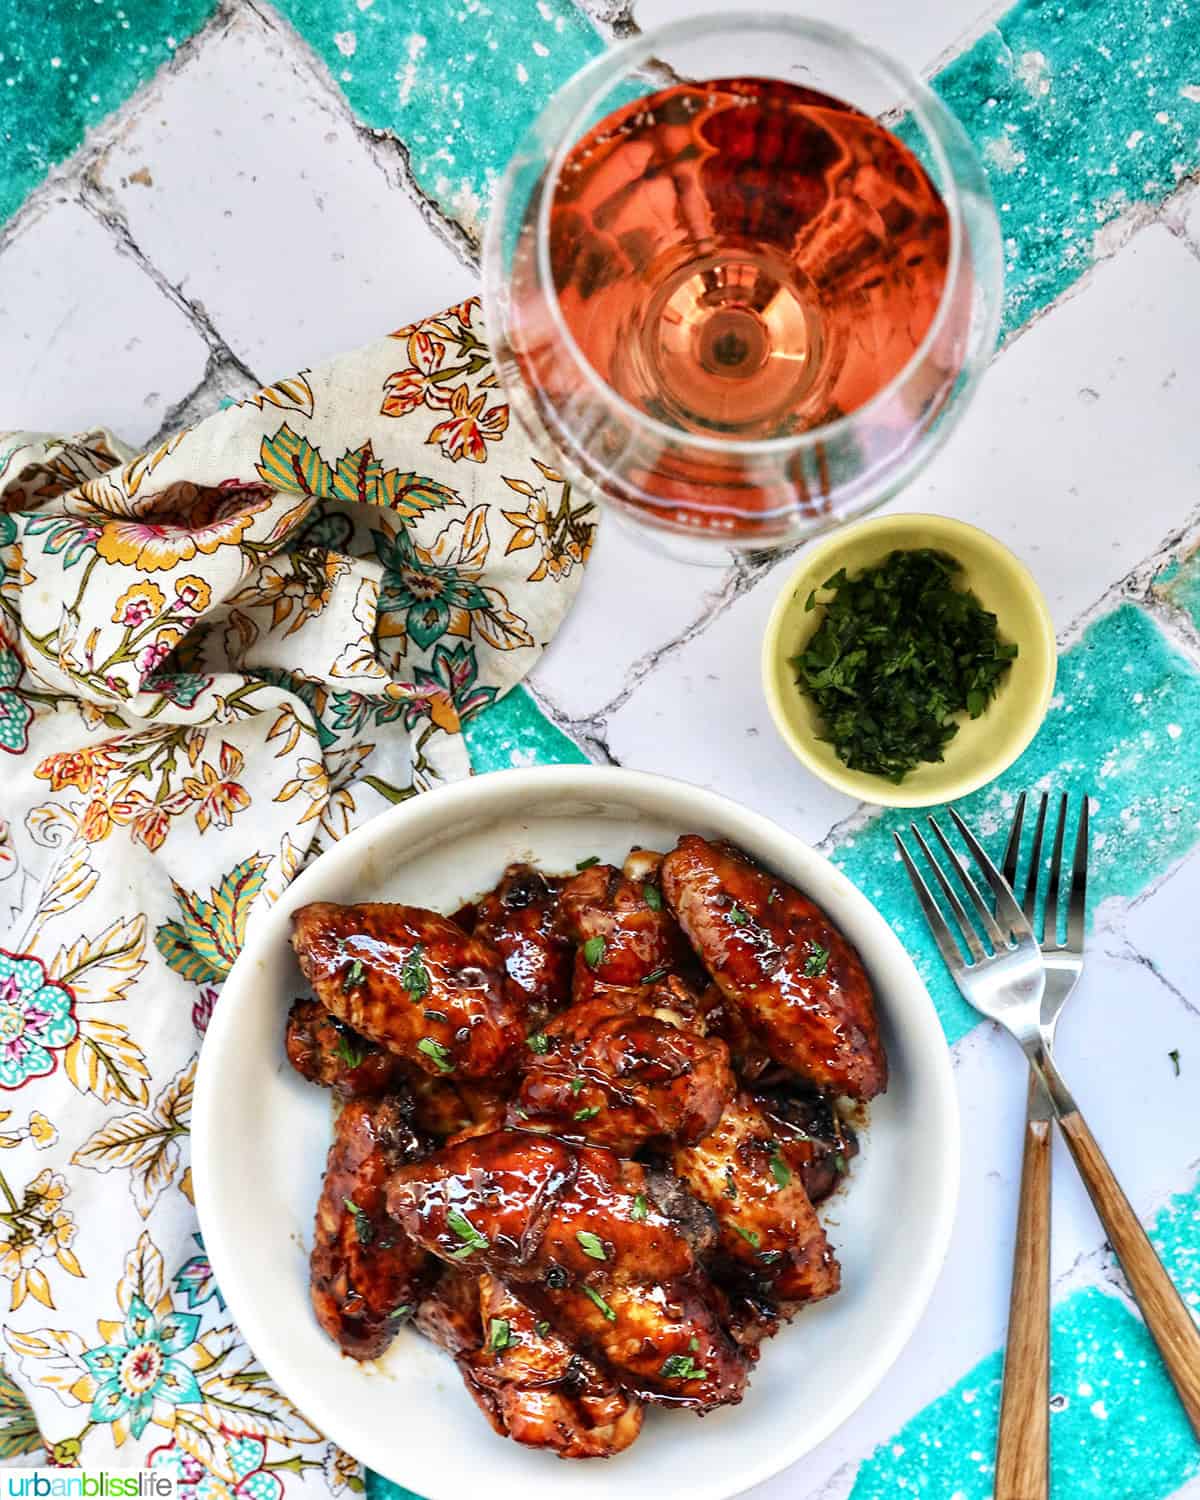 bowl of Filipino adobo chicken wings and fresh parsley, two forks, and a glass of rosé wine.